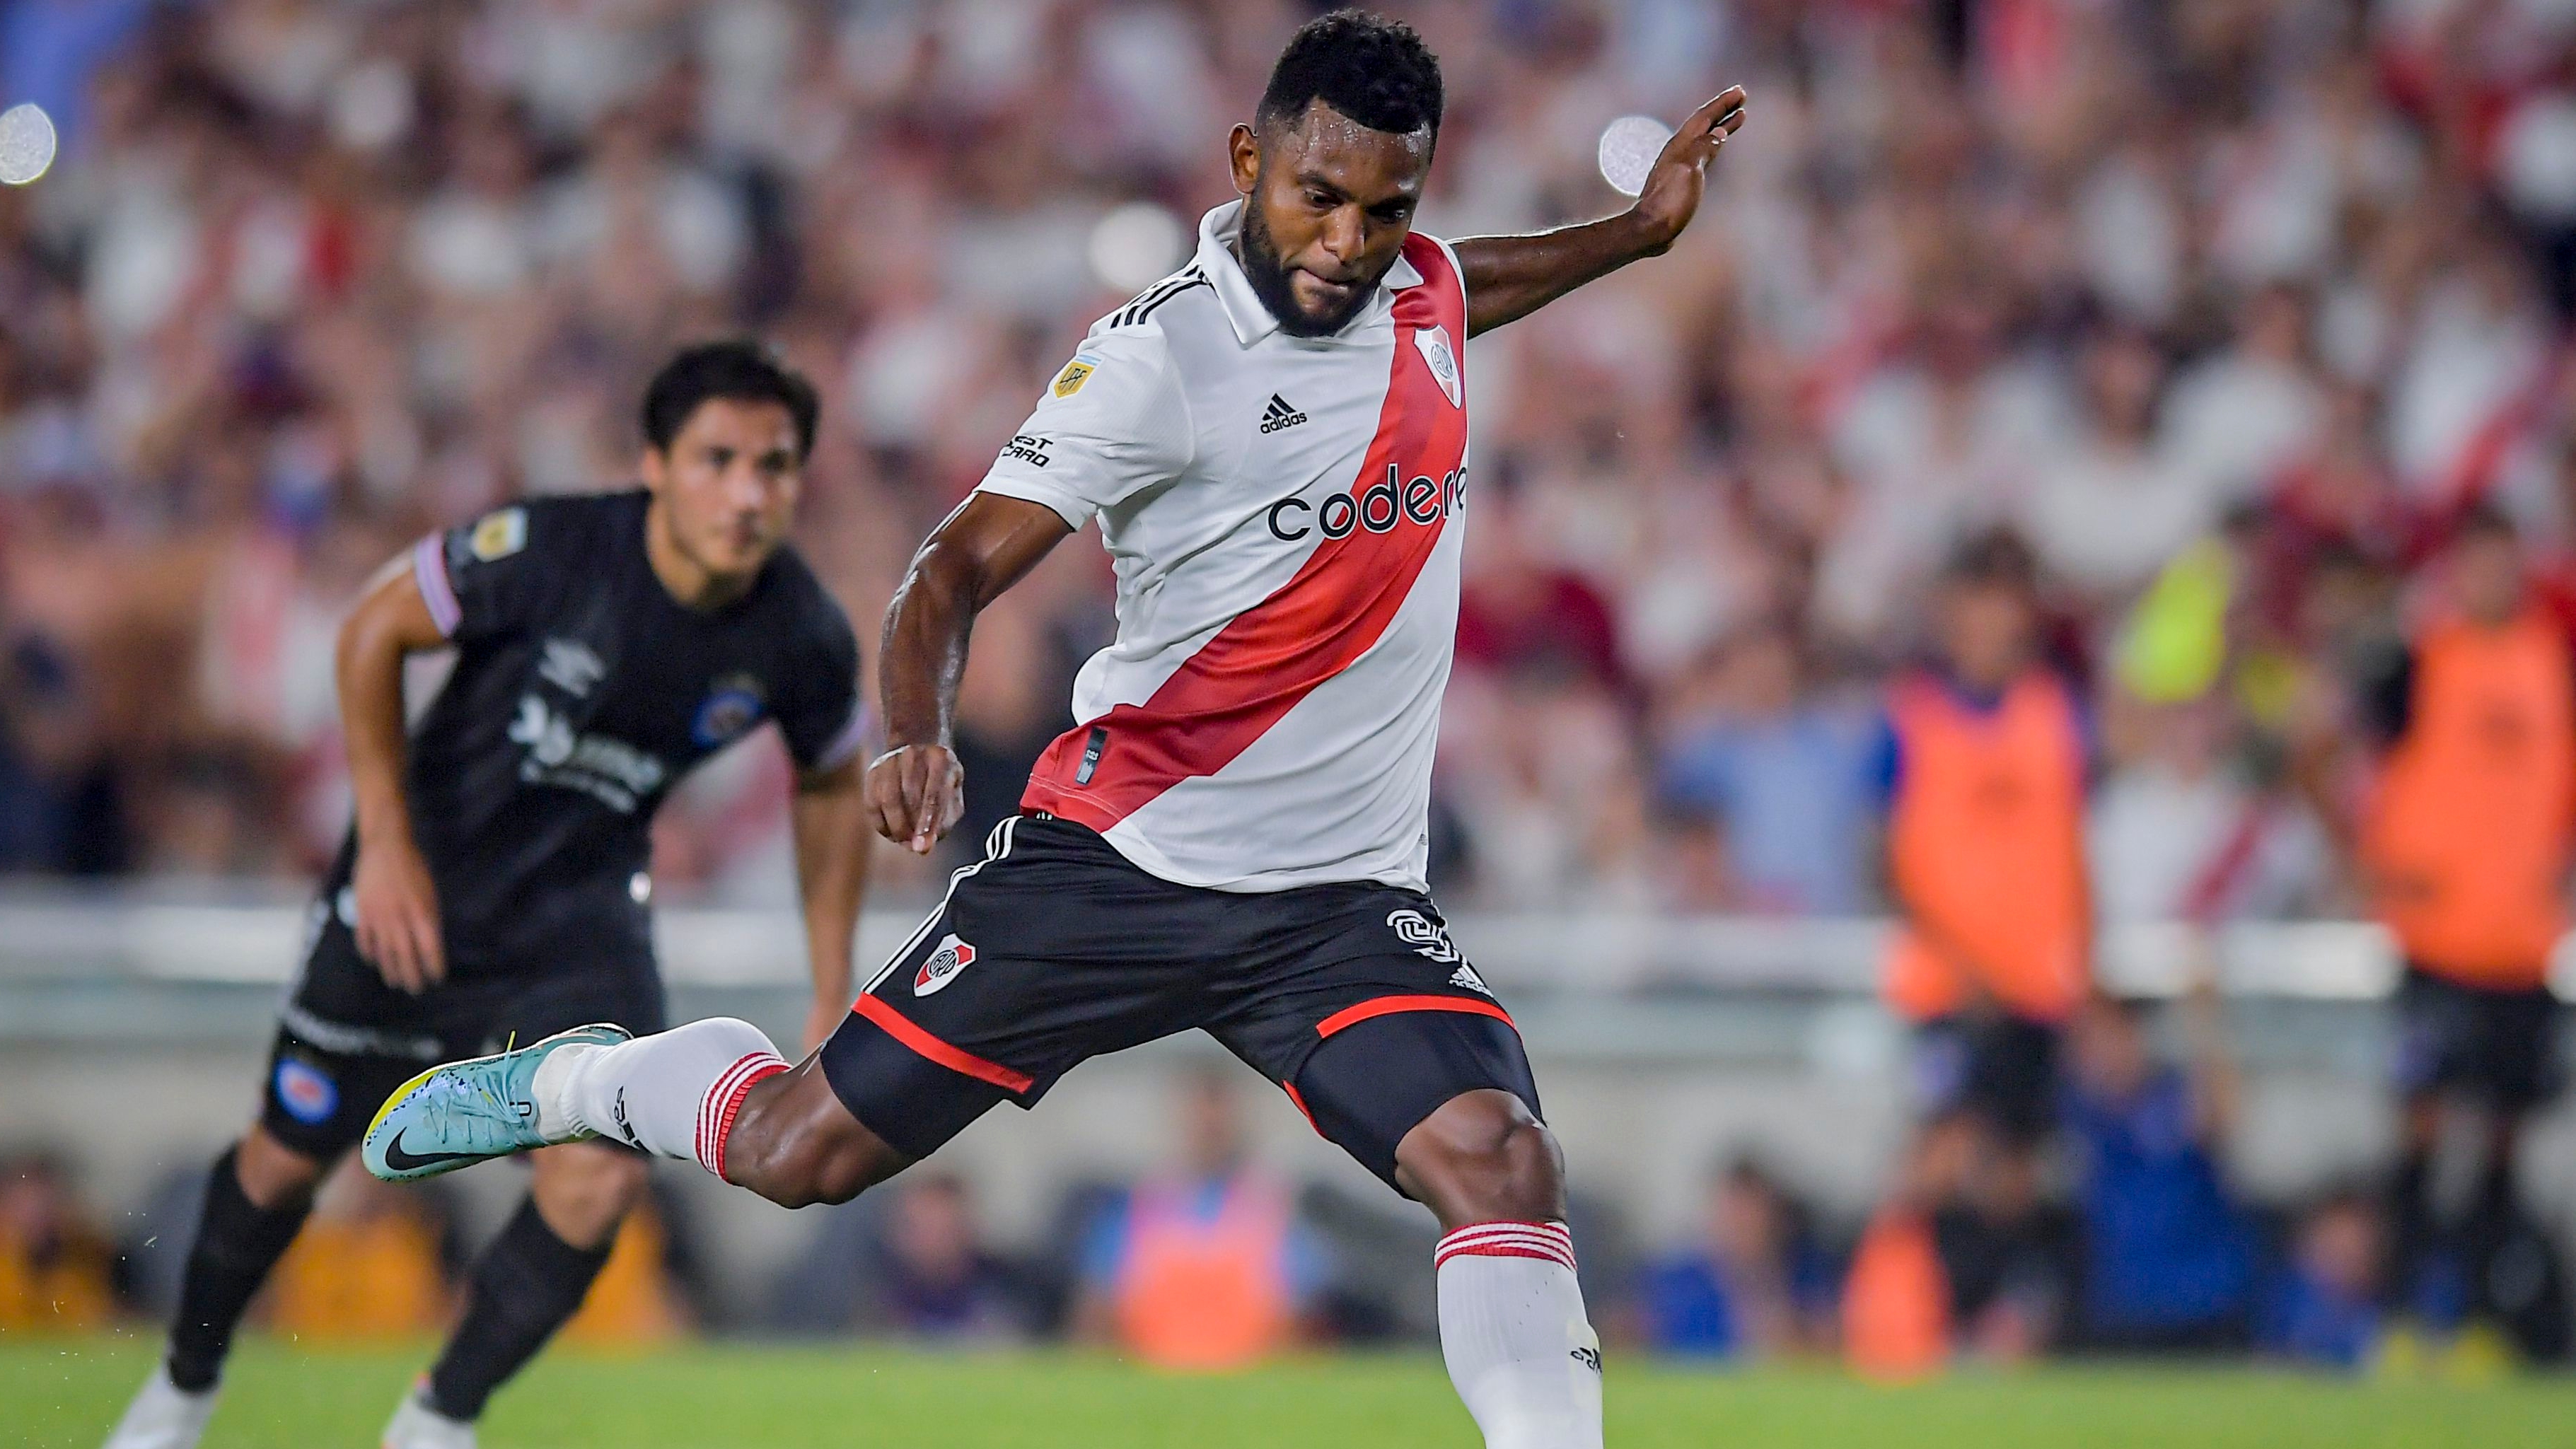 Colombian striker Miguel Ángel Borja scored with River Plate in the match vs.  Argentines Jrs.  Getty Images.